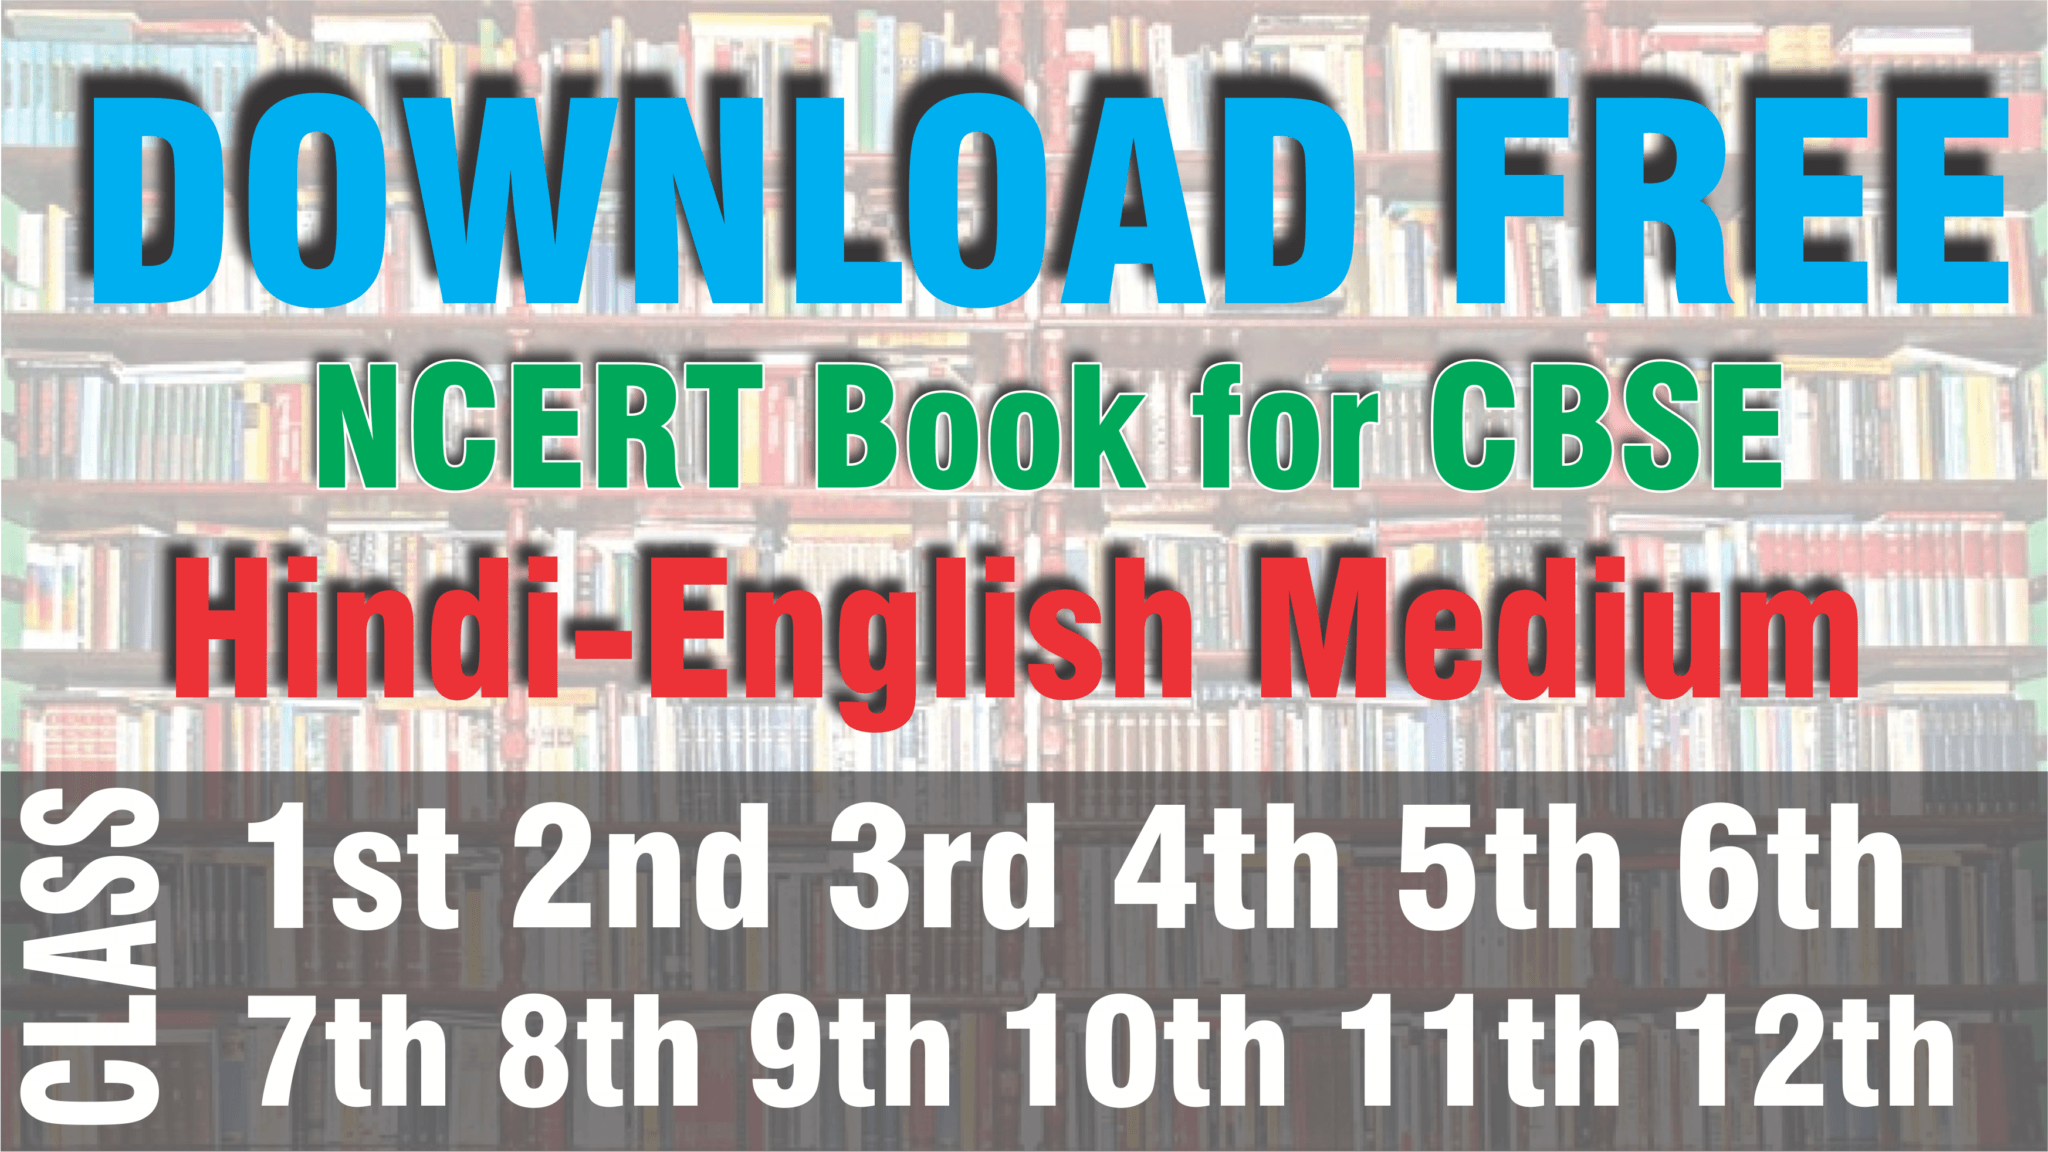 Download free NCERT Book for CBSE and Hinglish Medium Class 1st 2nd 3rd 4th 5th 6th 7th 8th 9th 10th 11th 12th